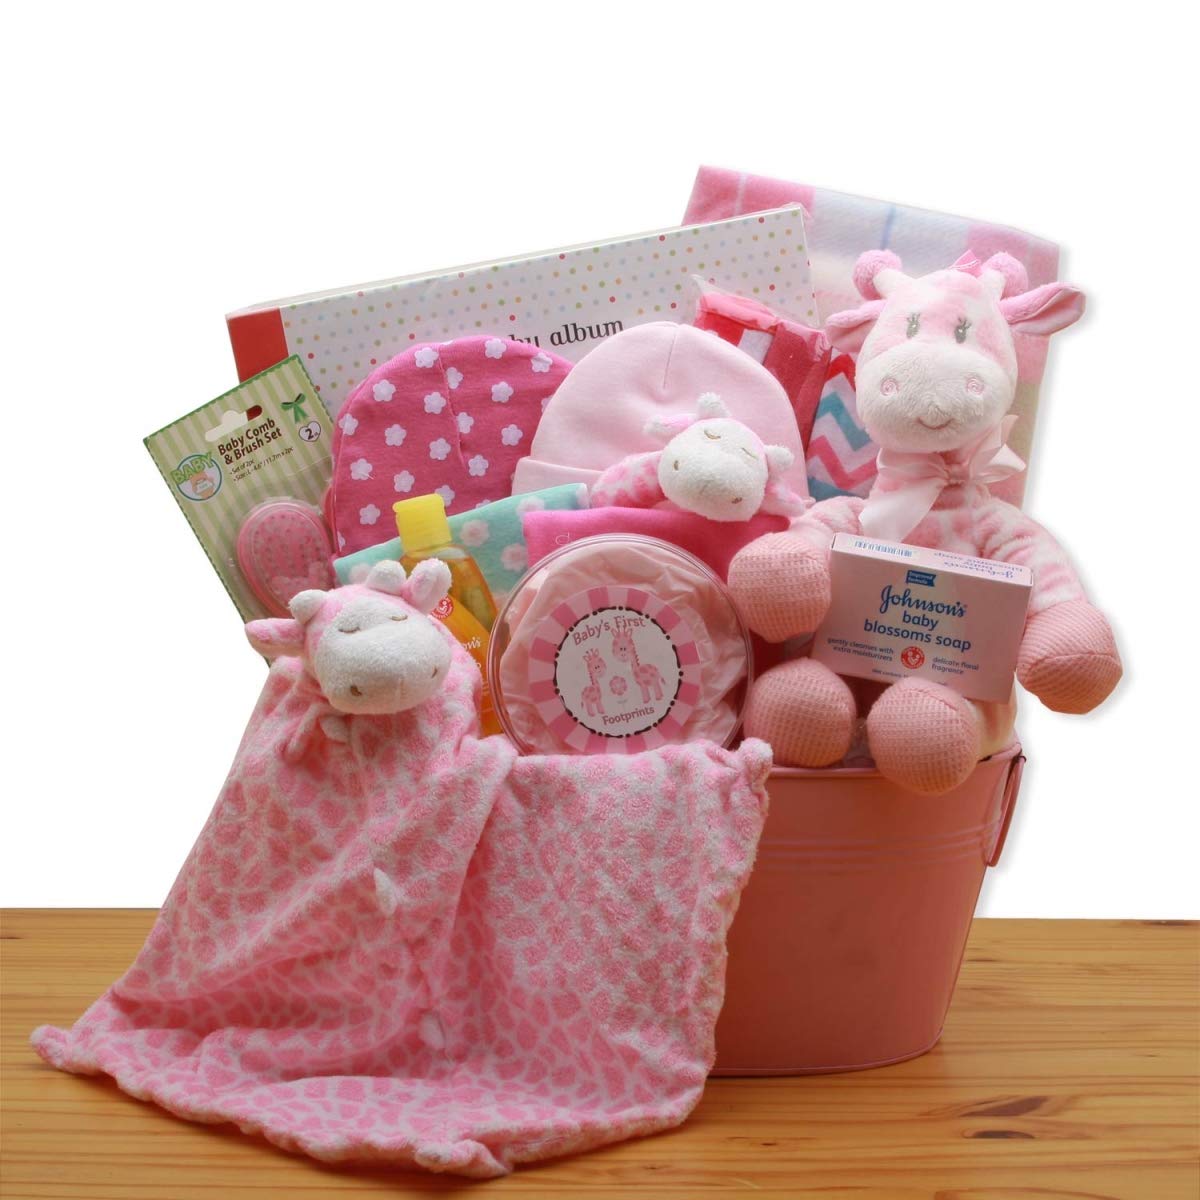 GBDS 890852-P Comfy & Cozy Safari Friends New Baby Gift Basket - Pink